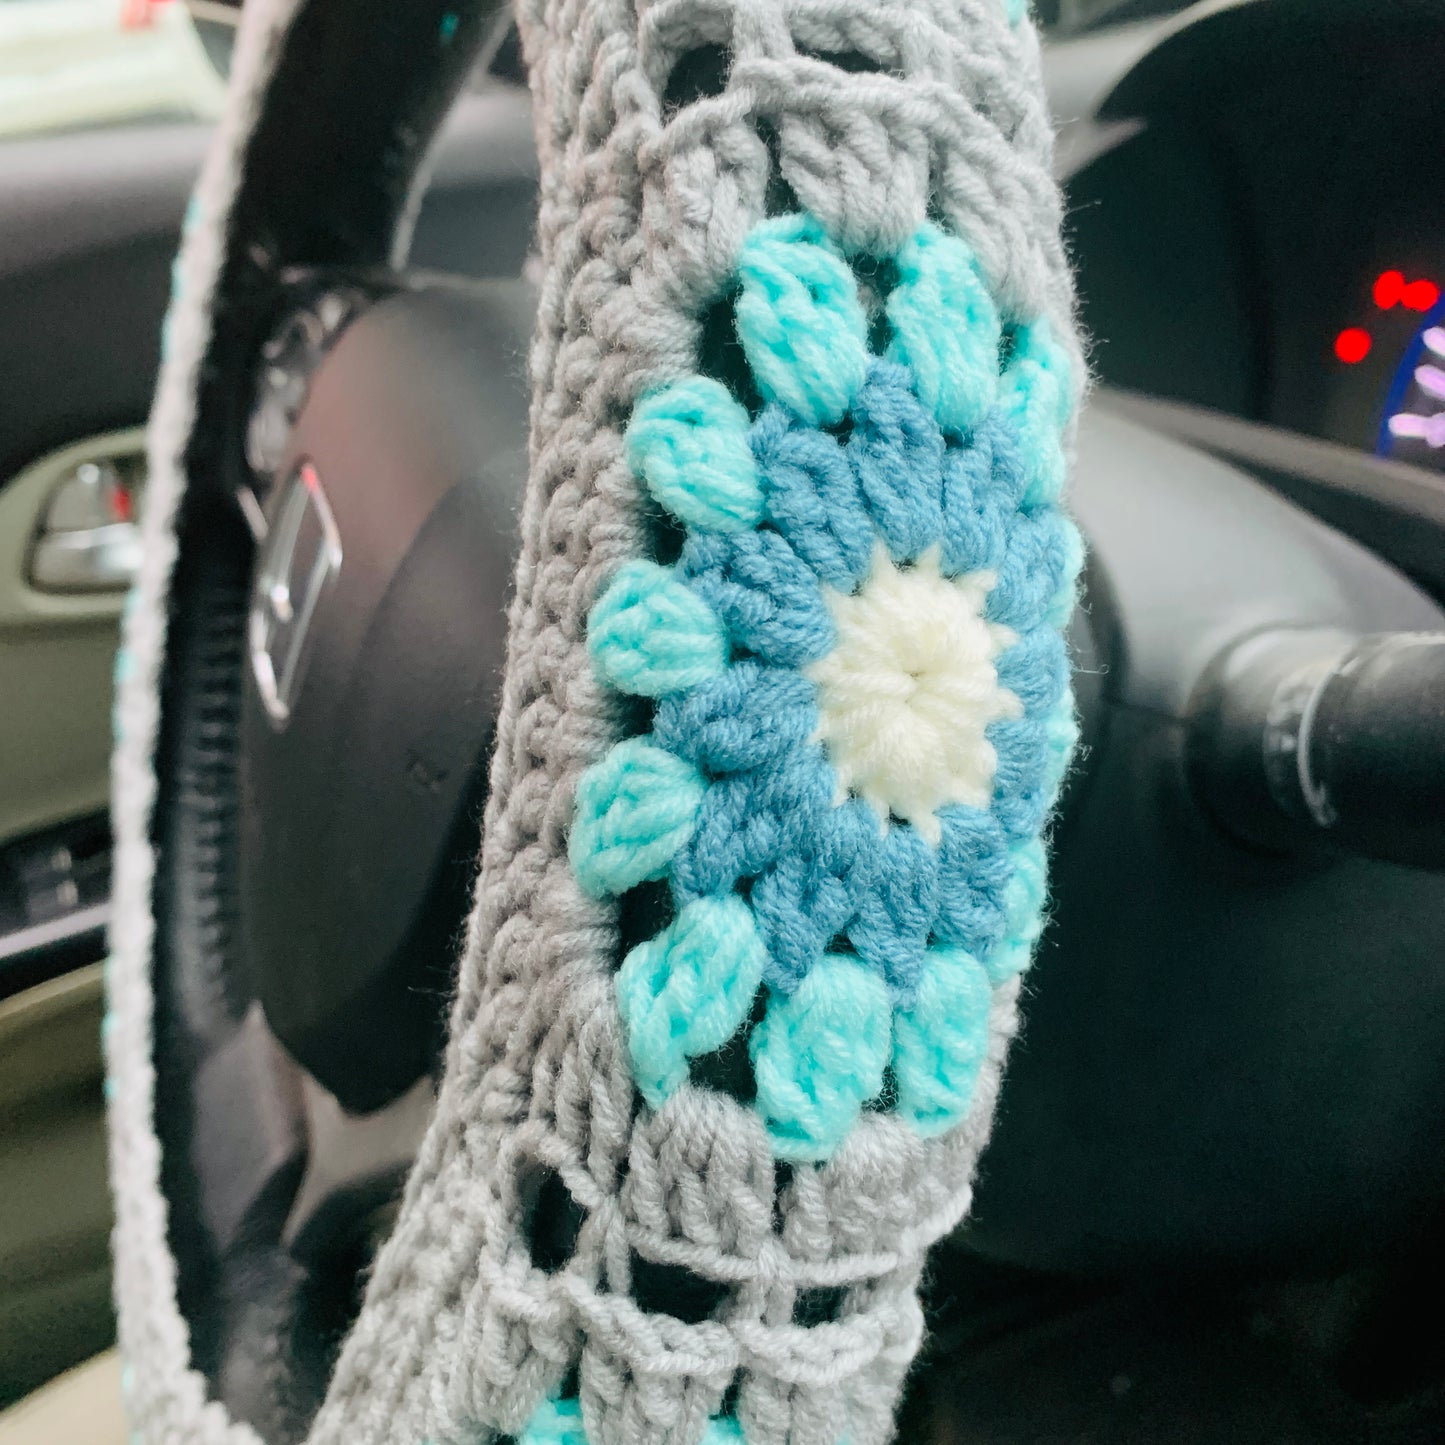 Steering Wheel Cover for Women, Crochet Daisy Flower Seat Belt Cover, Car  Accessories Decorations 